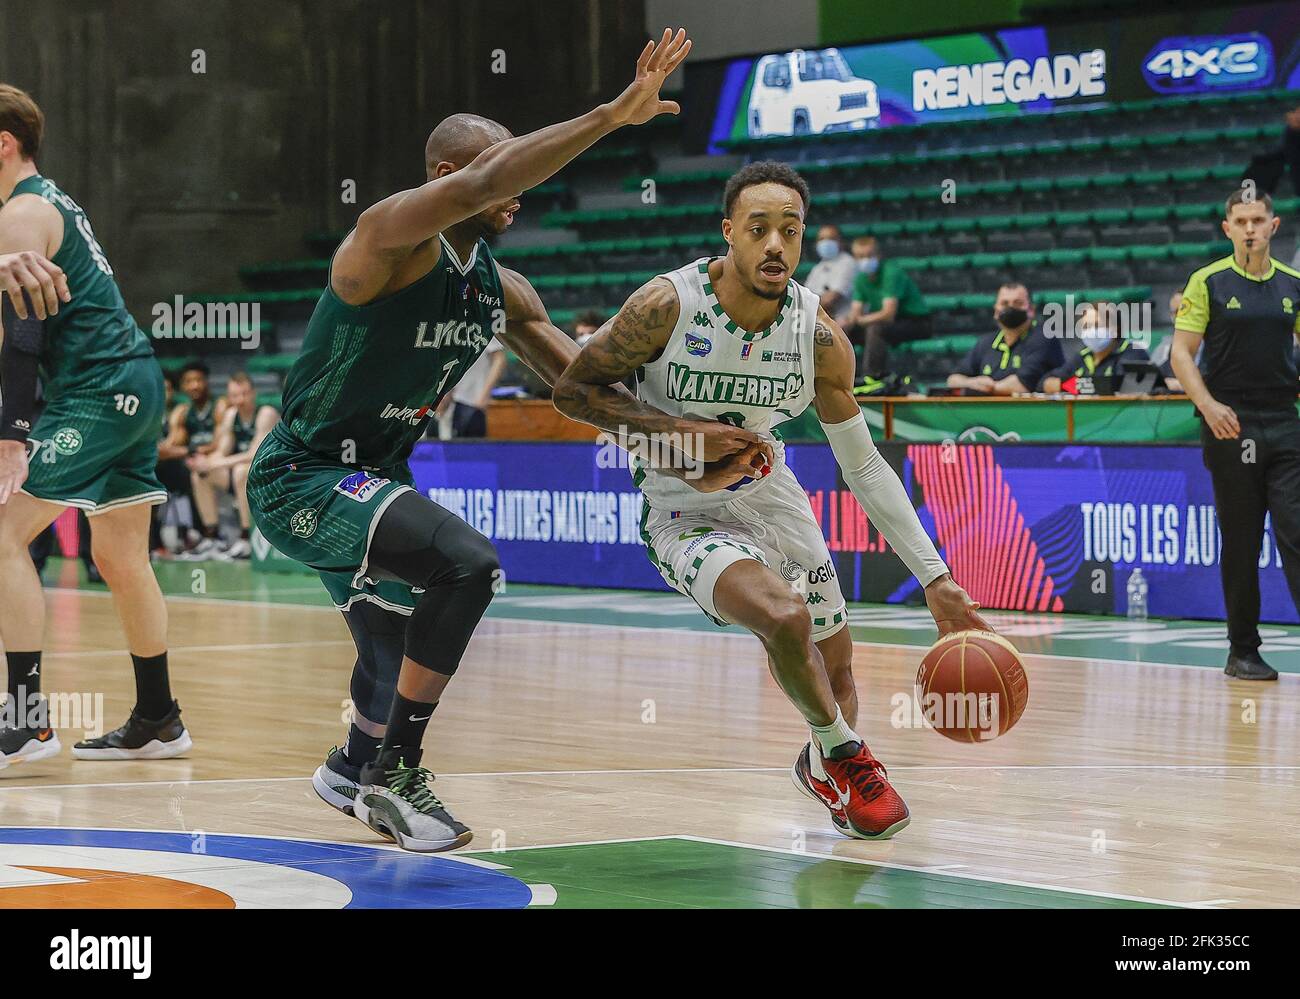 REED Marcquise of Nanterre 92 during the LNB Pro A Jeep Elite Nanterre 92 v  Limoges